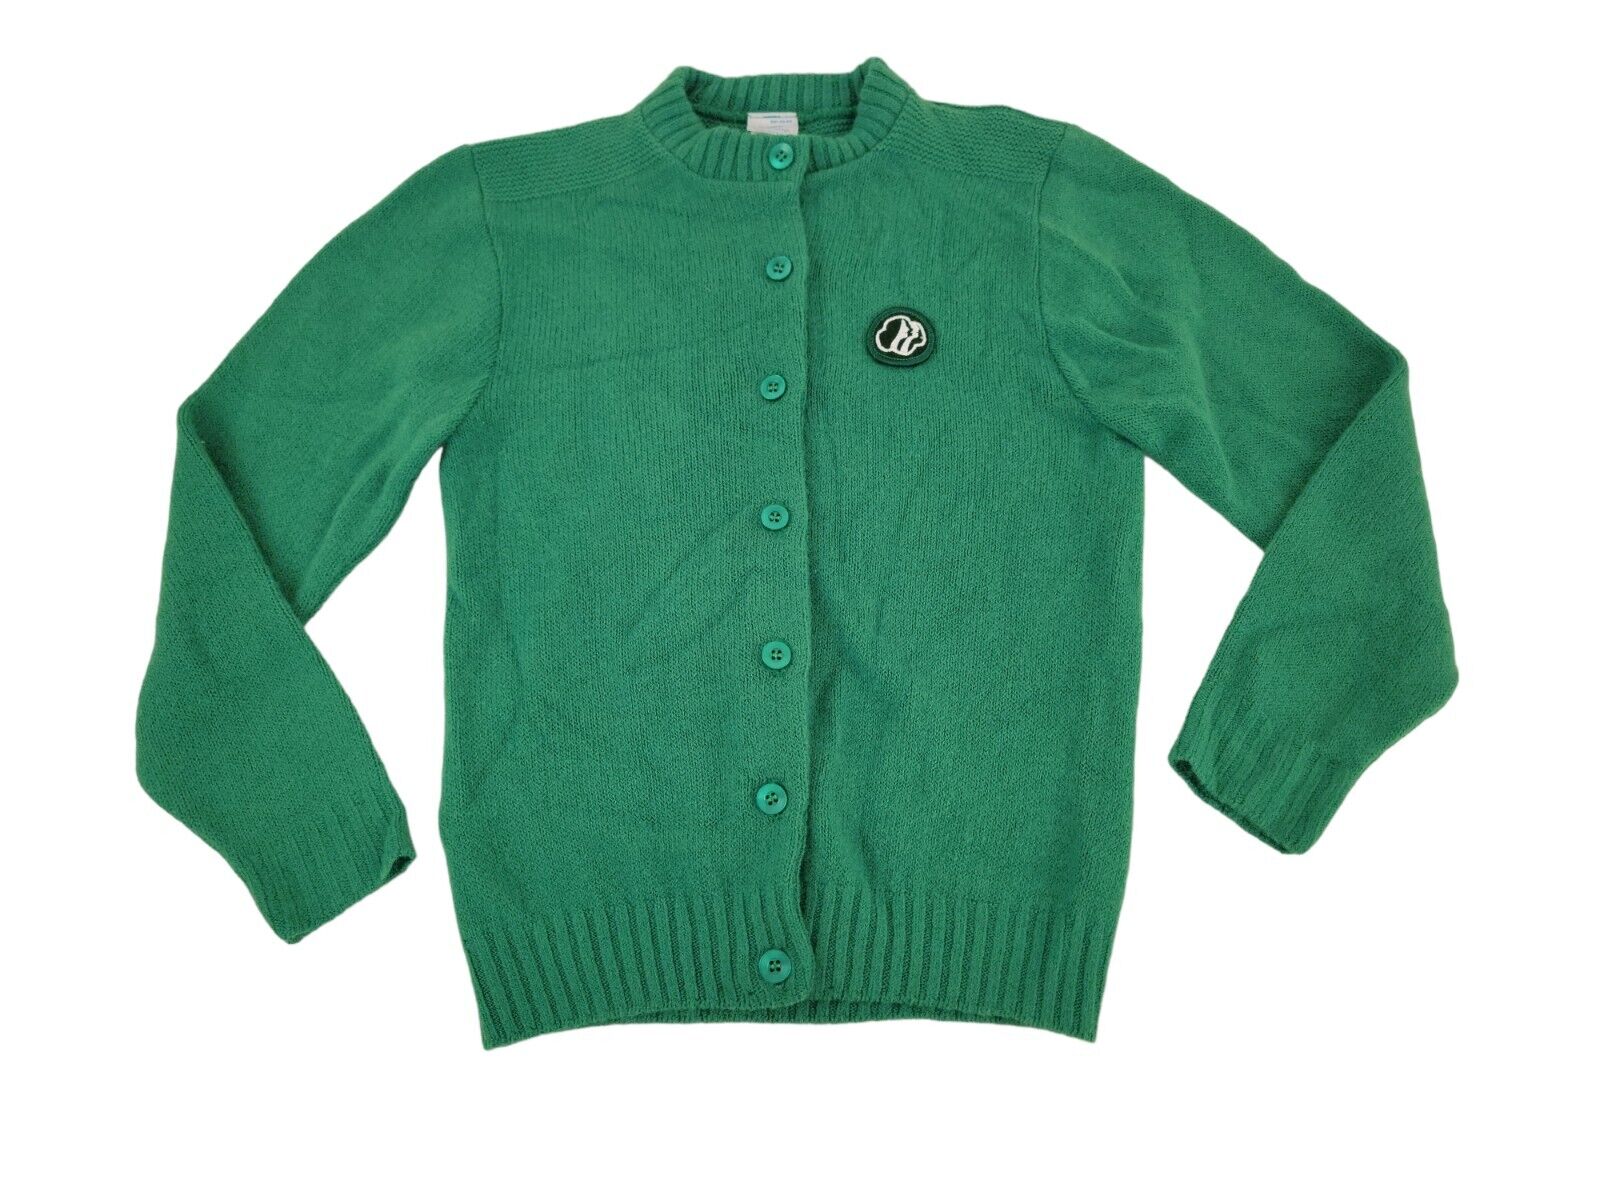 Vintage Girl Scouts Sweater Emerald Green 1960s Button Up Cardigan Sz Small 8/10